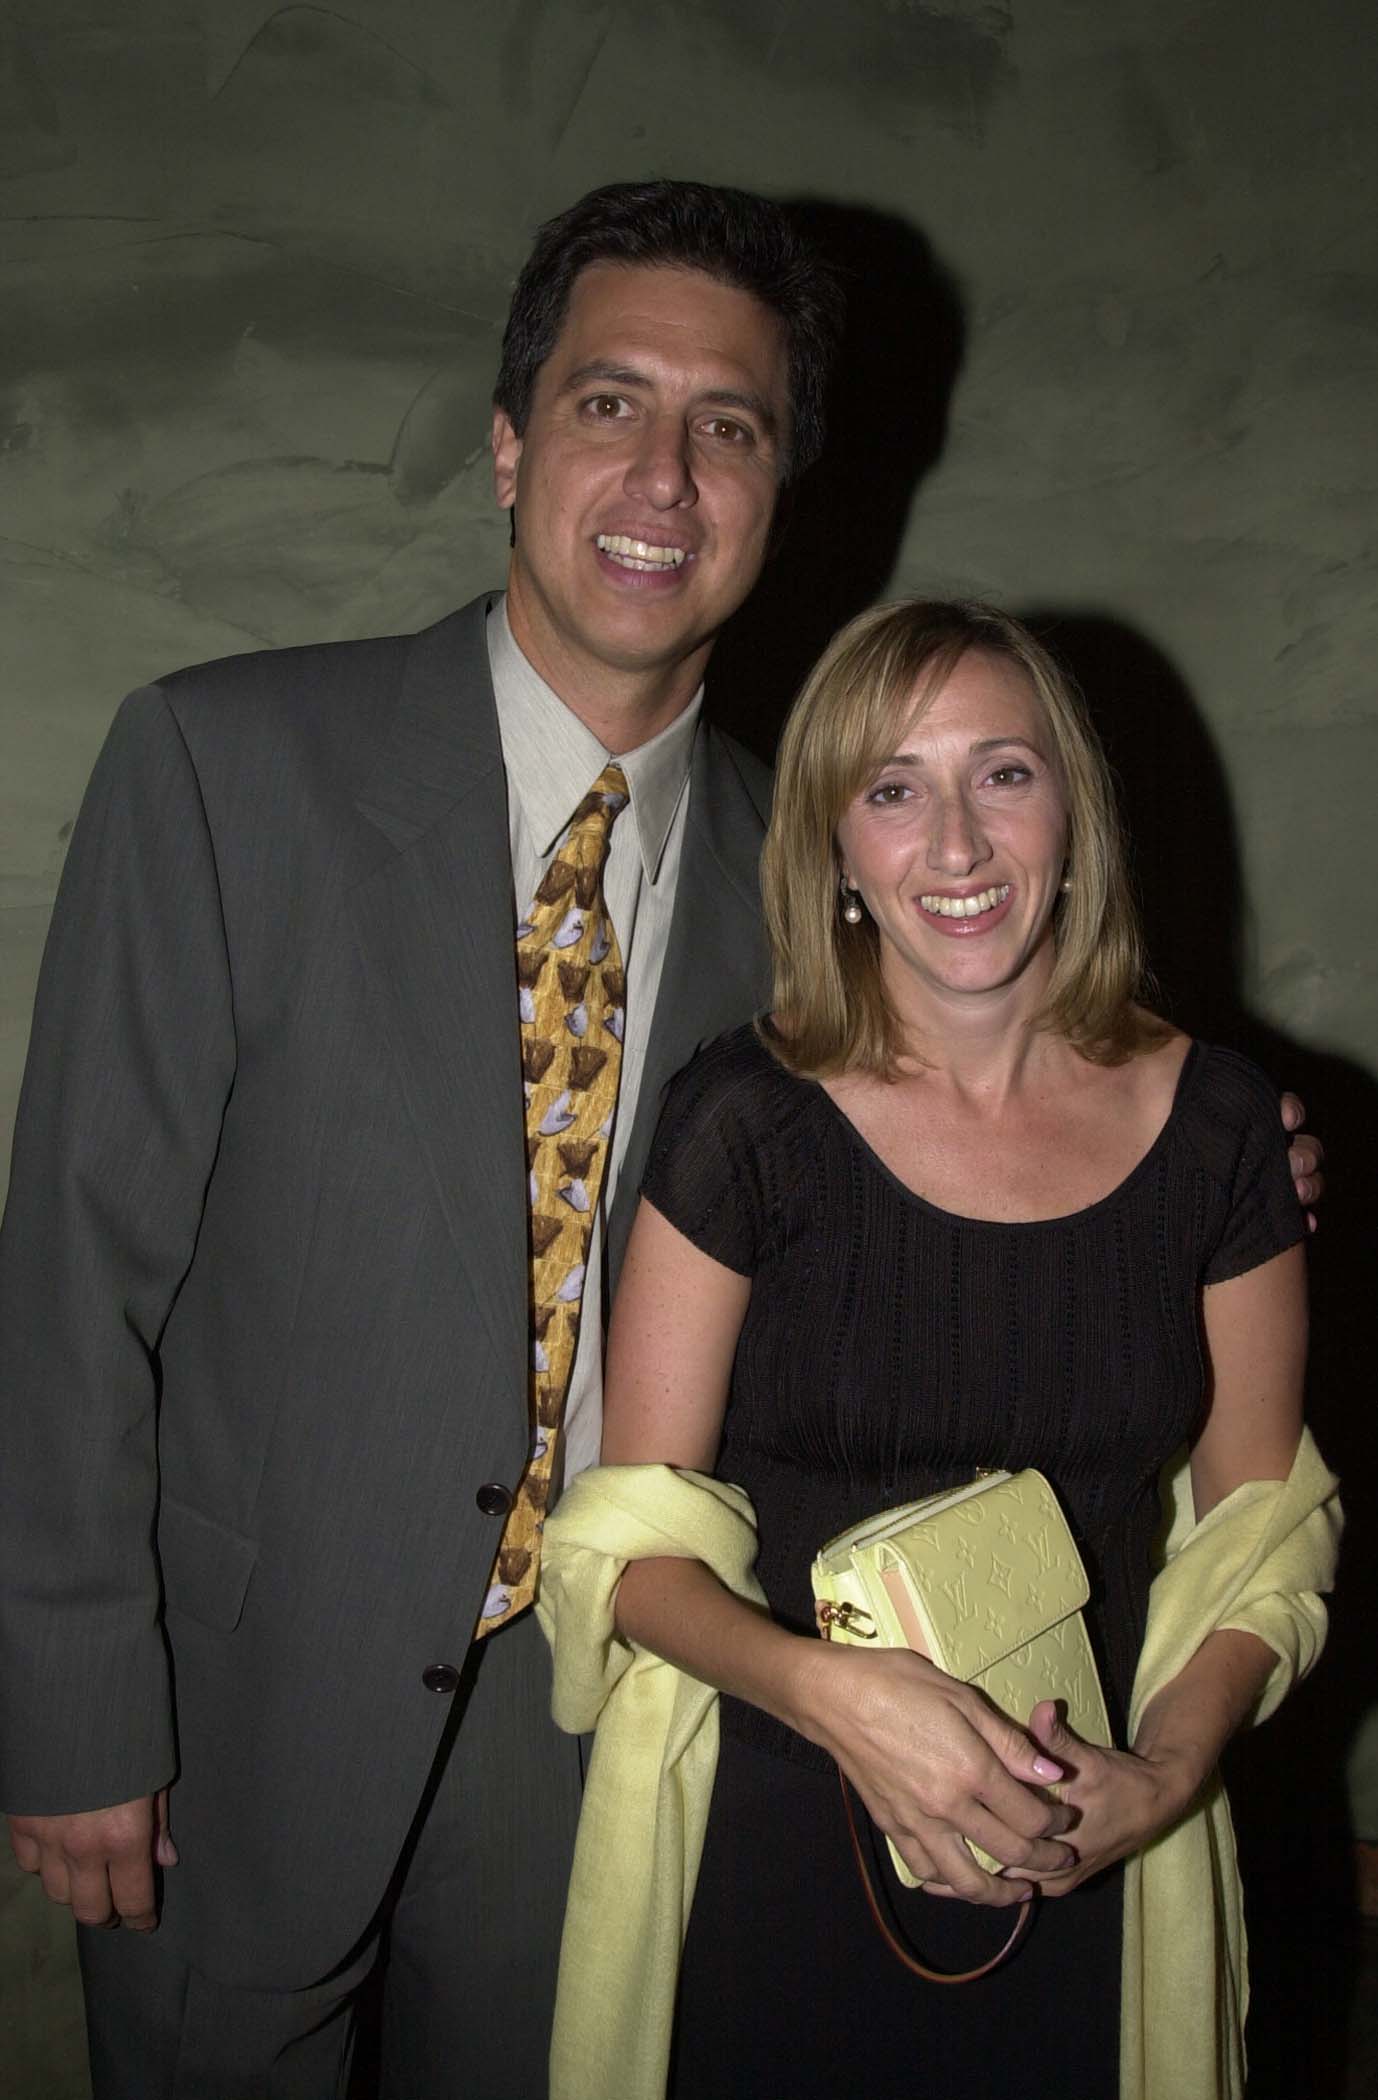 Ray Romano & Anna Scarpulla during the 100th episdode party of "Everyone Loves Raymond" at Spago in Beverly Hills, California | Source: Getty Images